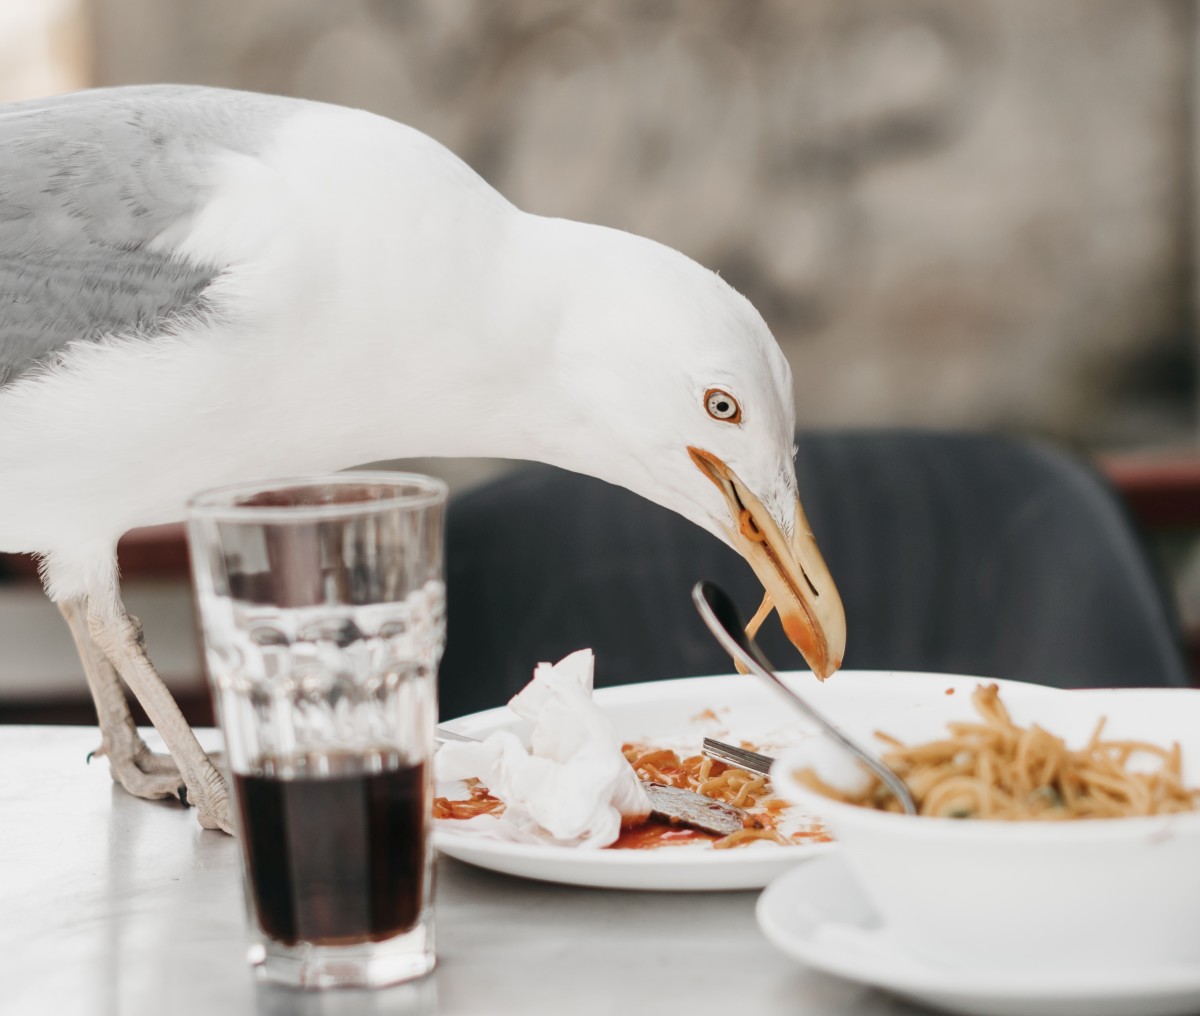 A seagull helps itself to a tasty meal.